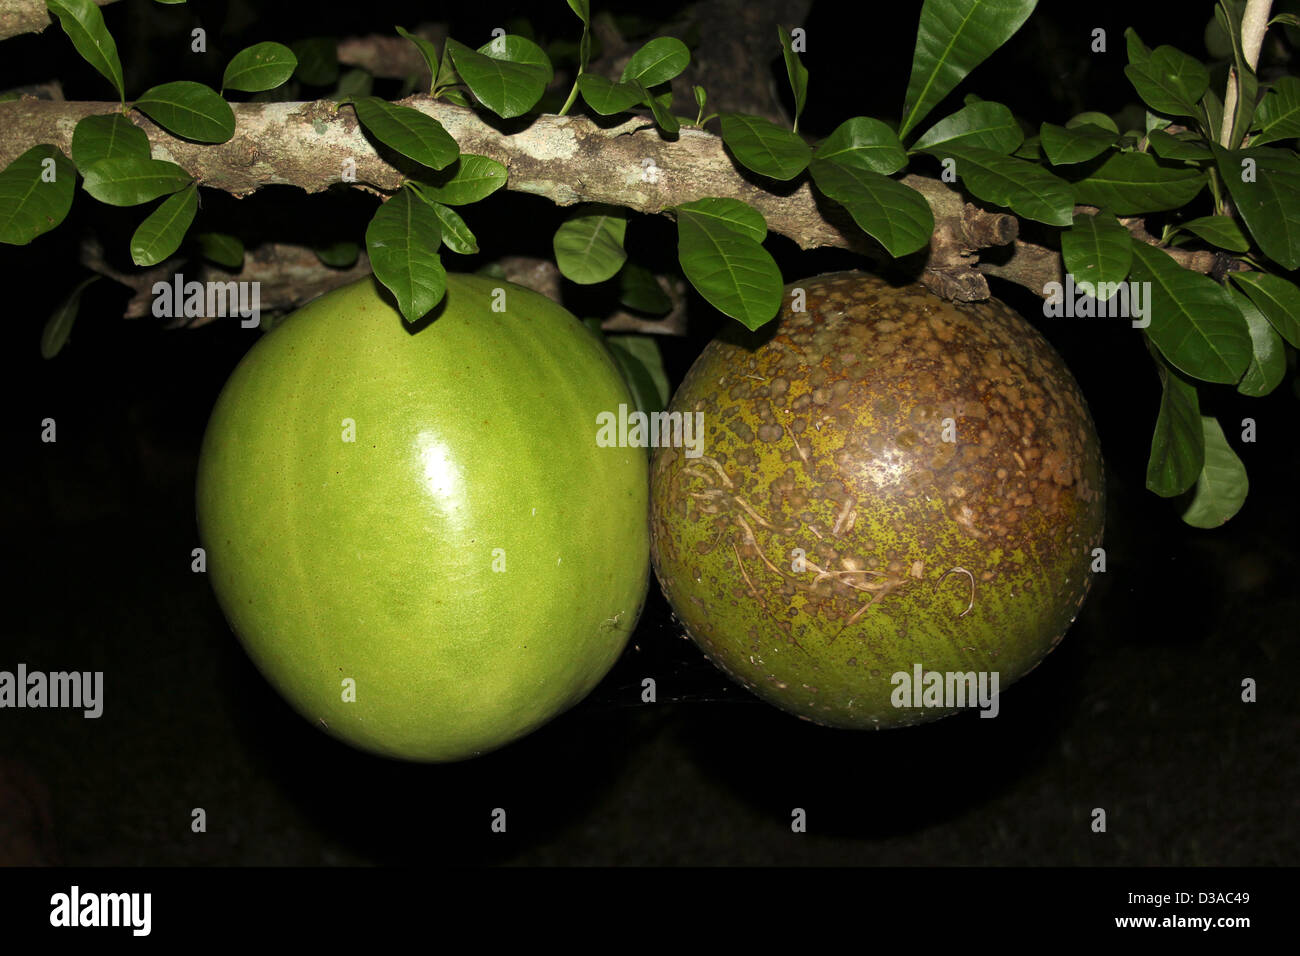 Football Size Gourds Hanging From A Tree Branch Stock Photo